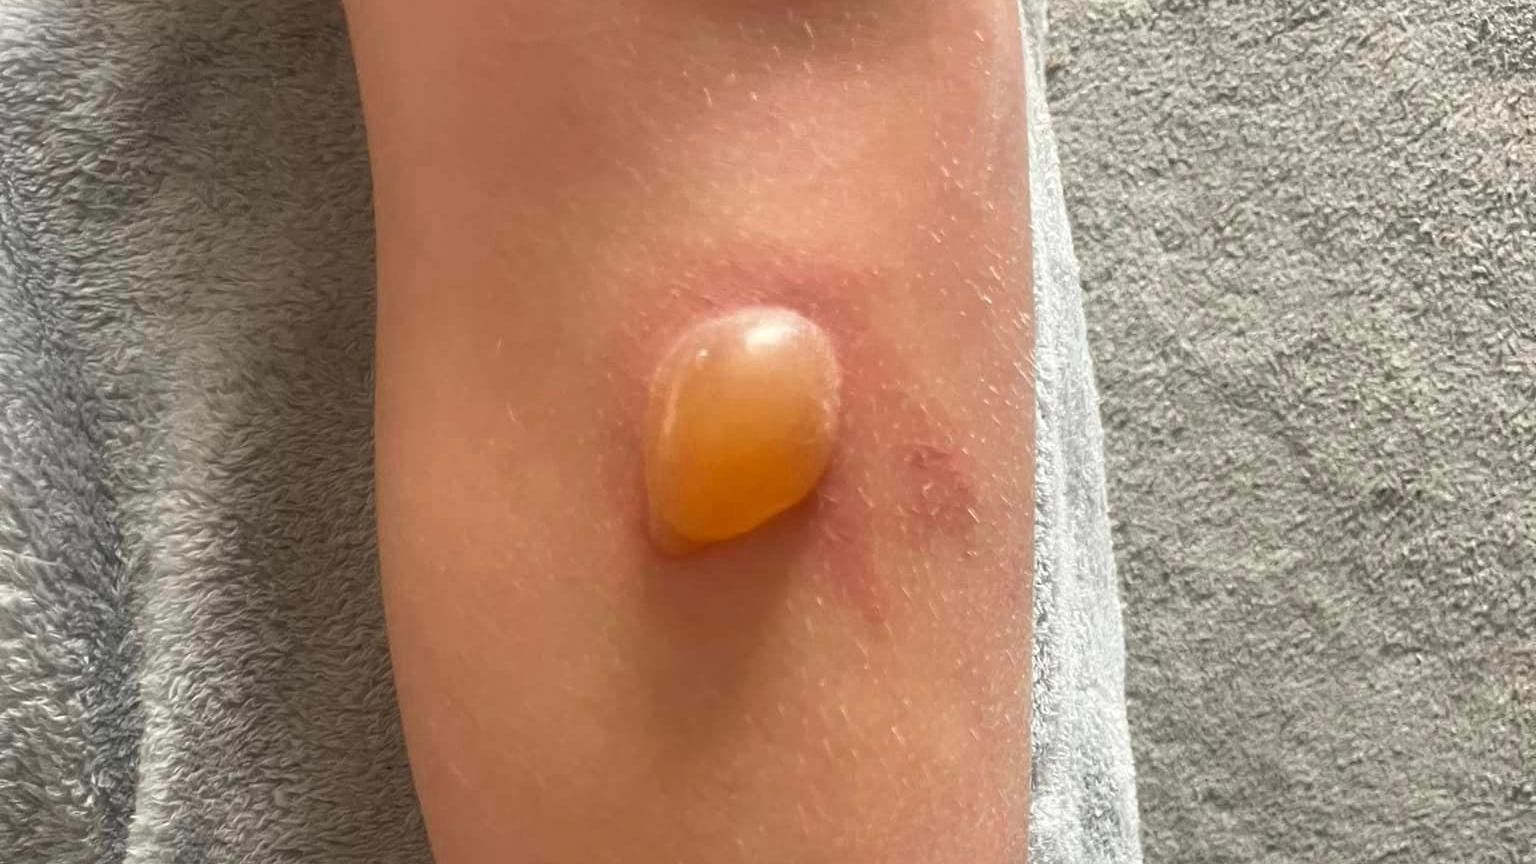 A yellow pus-filled blister on a boy's leg, as a result of giant hogweed